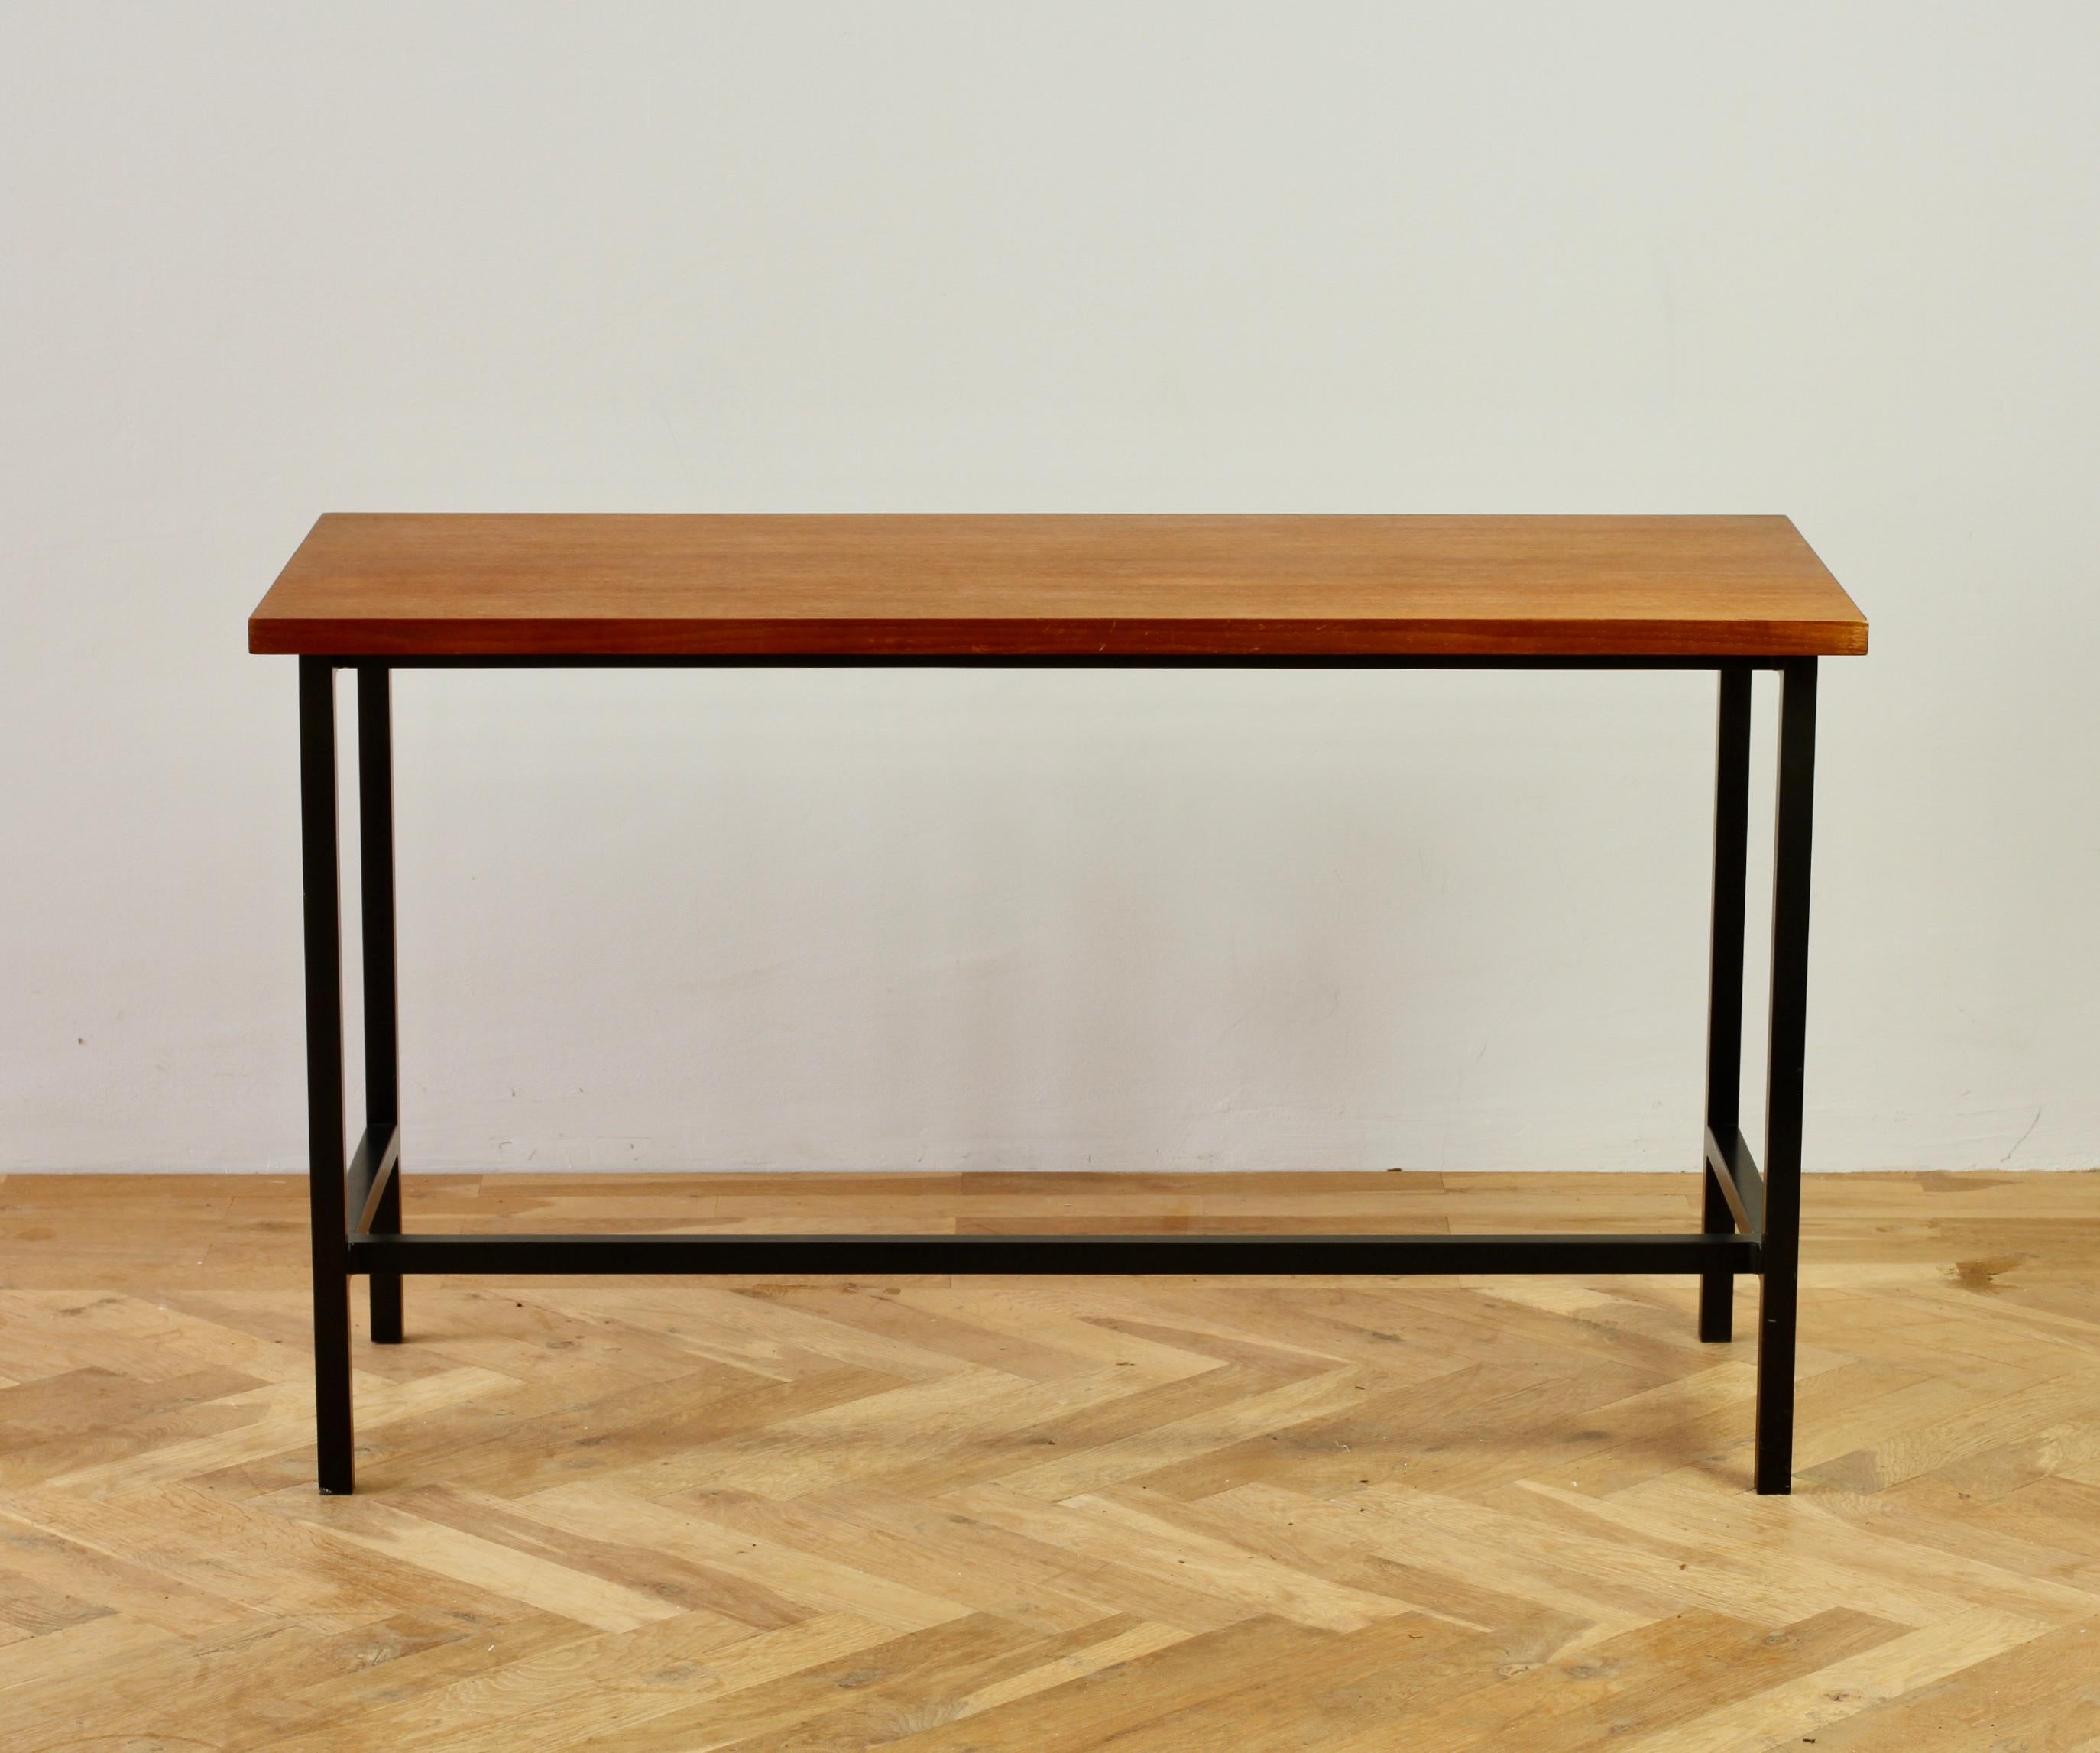 20th Century Florence Knoll 1950s Mid-Century Wood Veneer Black Frame Desk or Console Table For Sale